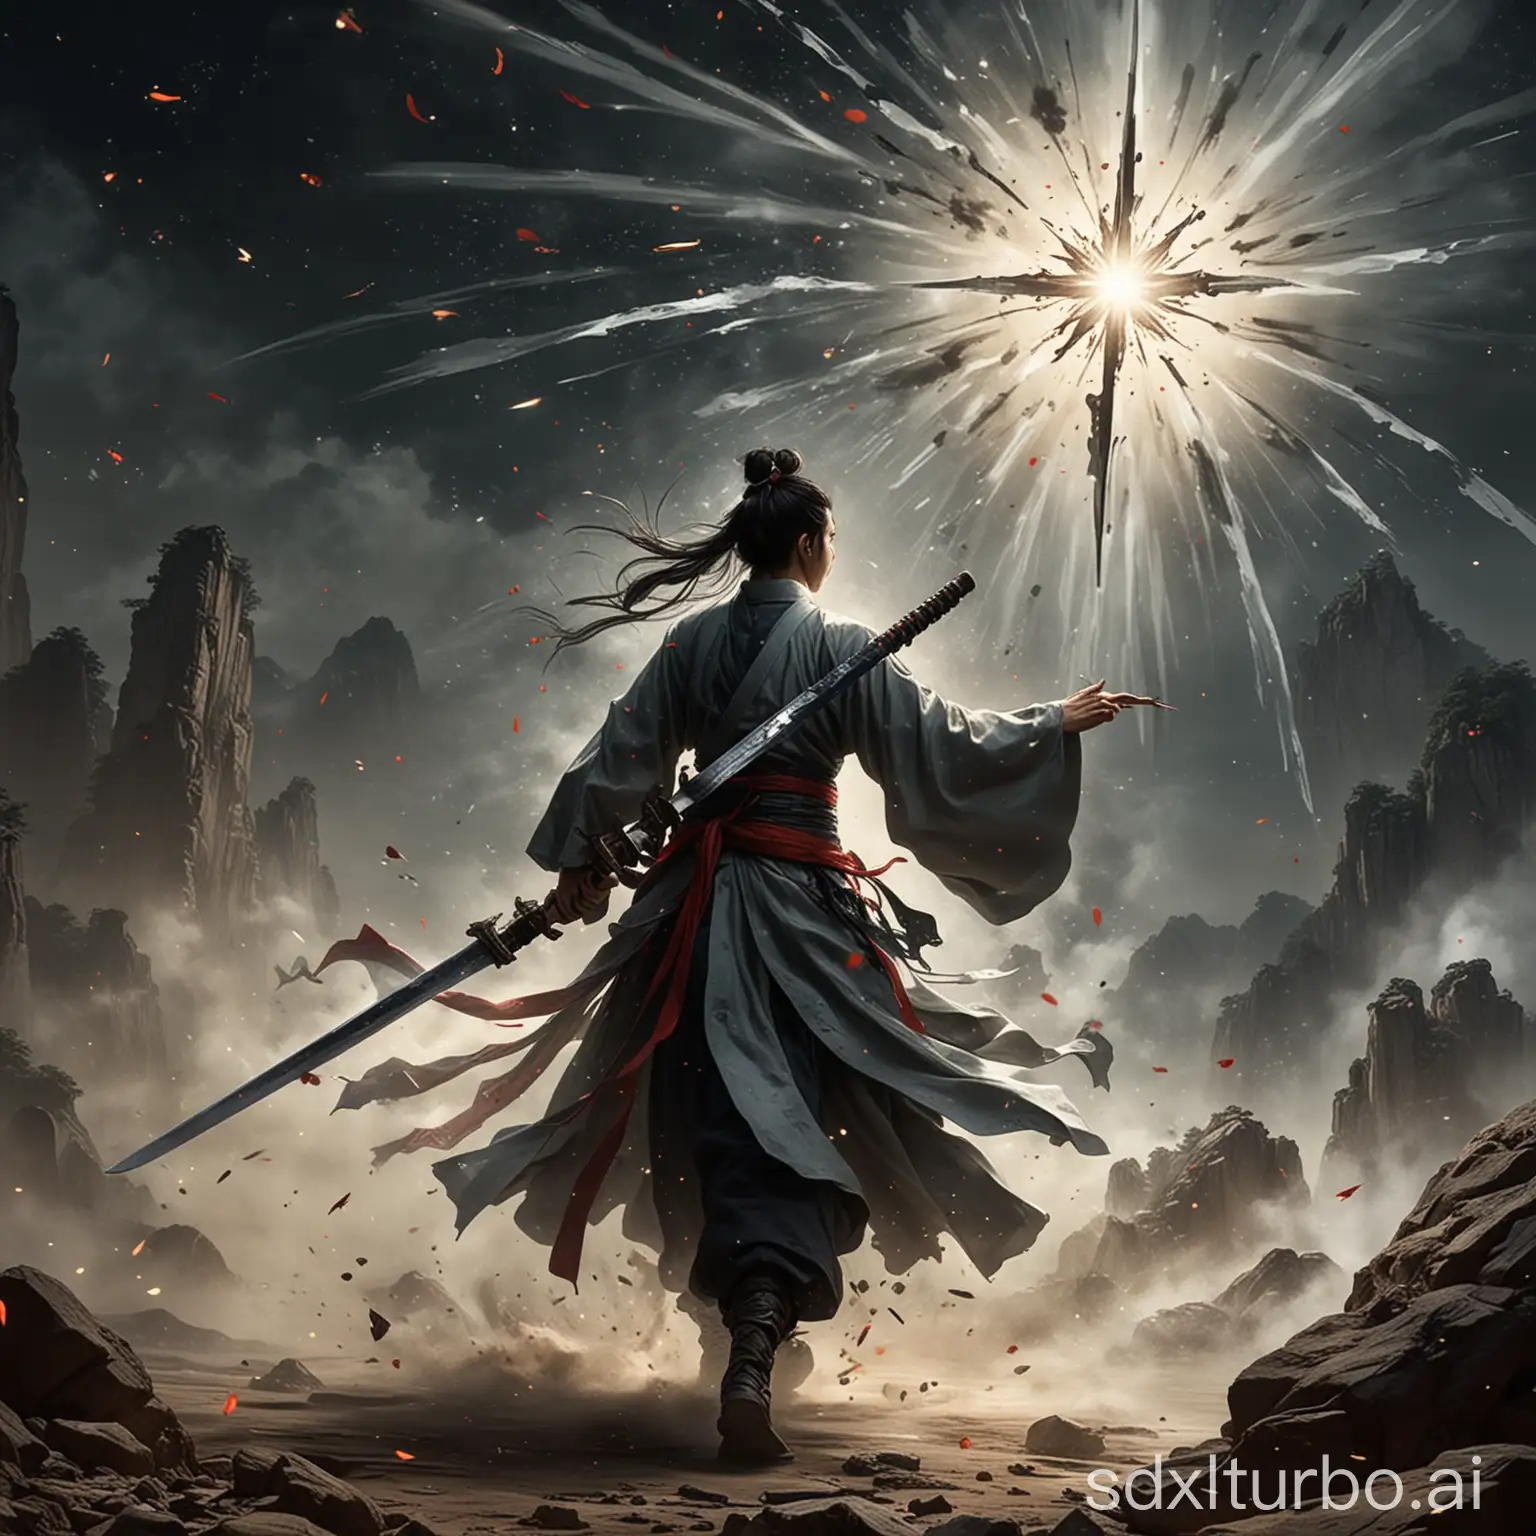 ‘One Sword Rips Through the Star’ or ‘One-stroke Burst Star’. The original sentence in Chinese is a phrase from wuxia (Chinese high-fantasy) novels, often used to describe a powerful sword strike.